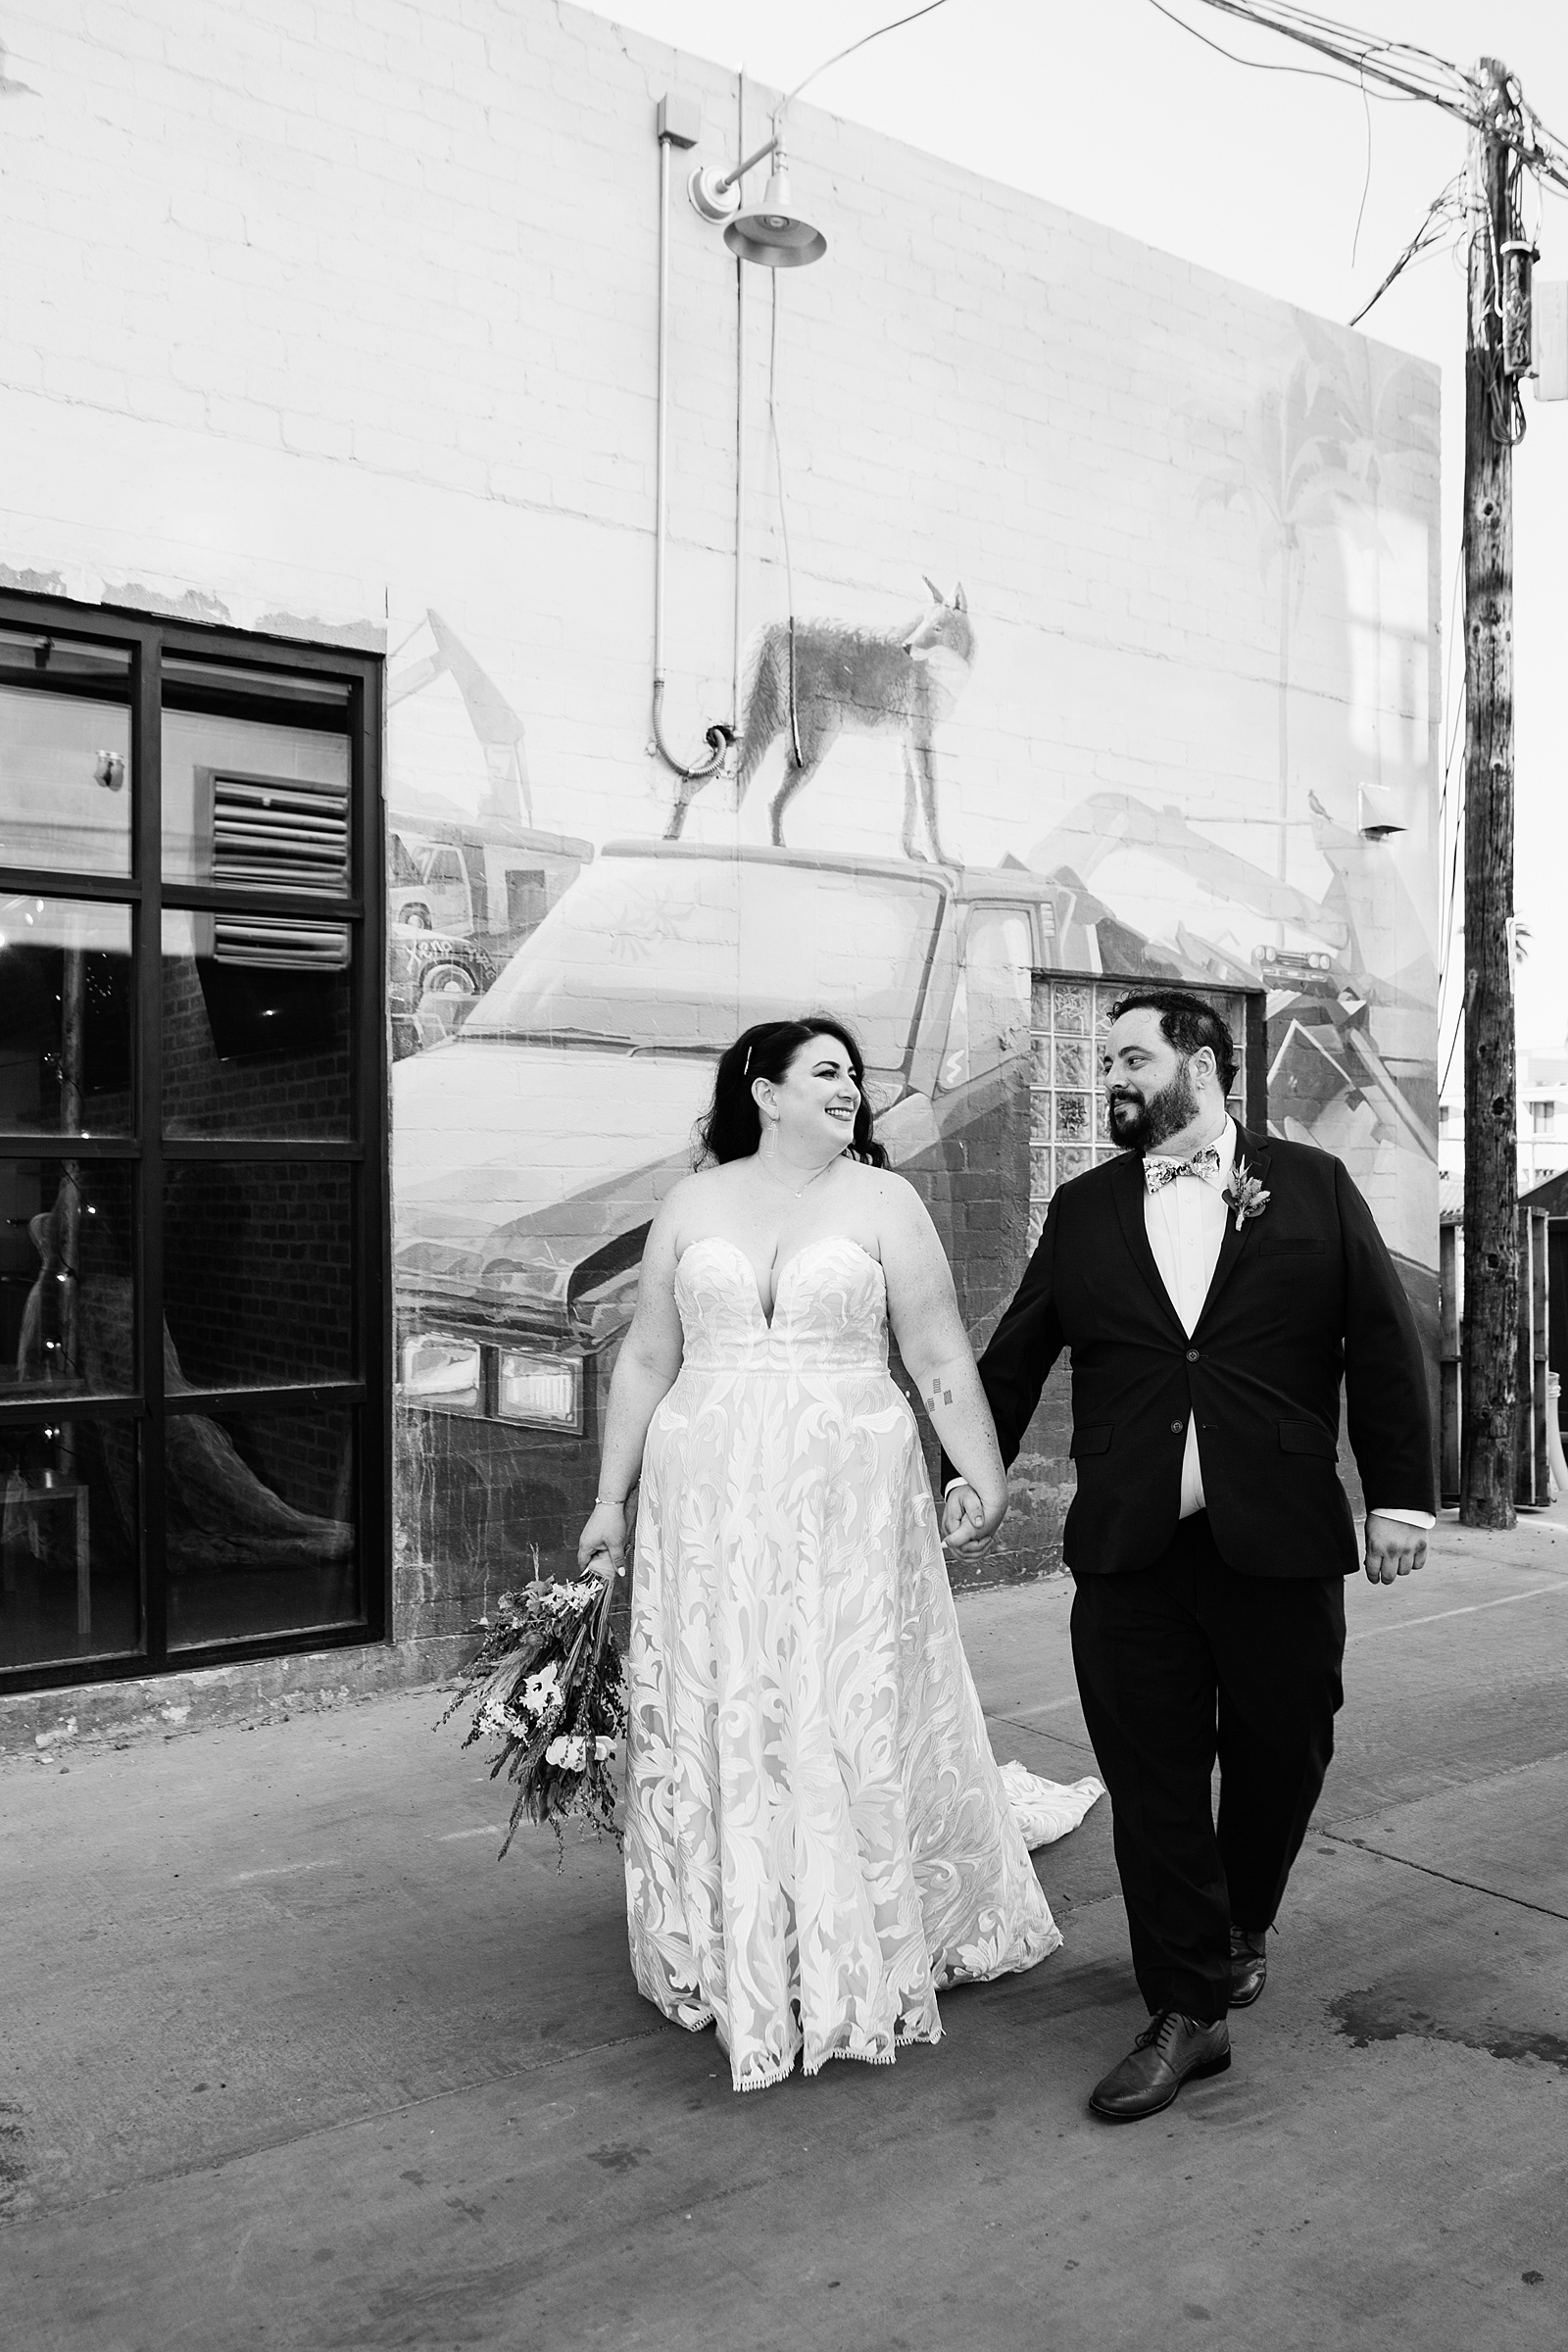 Bride and Groom walking together during their MonOrchid wedding by Arizona wedding photographer PMA Photography.